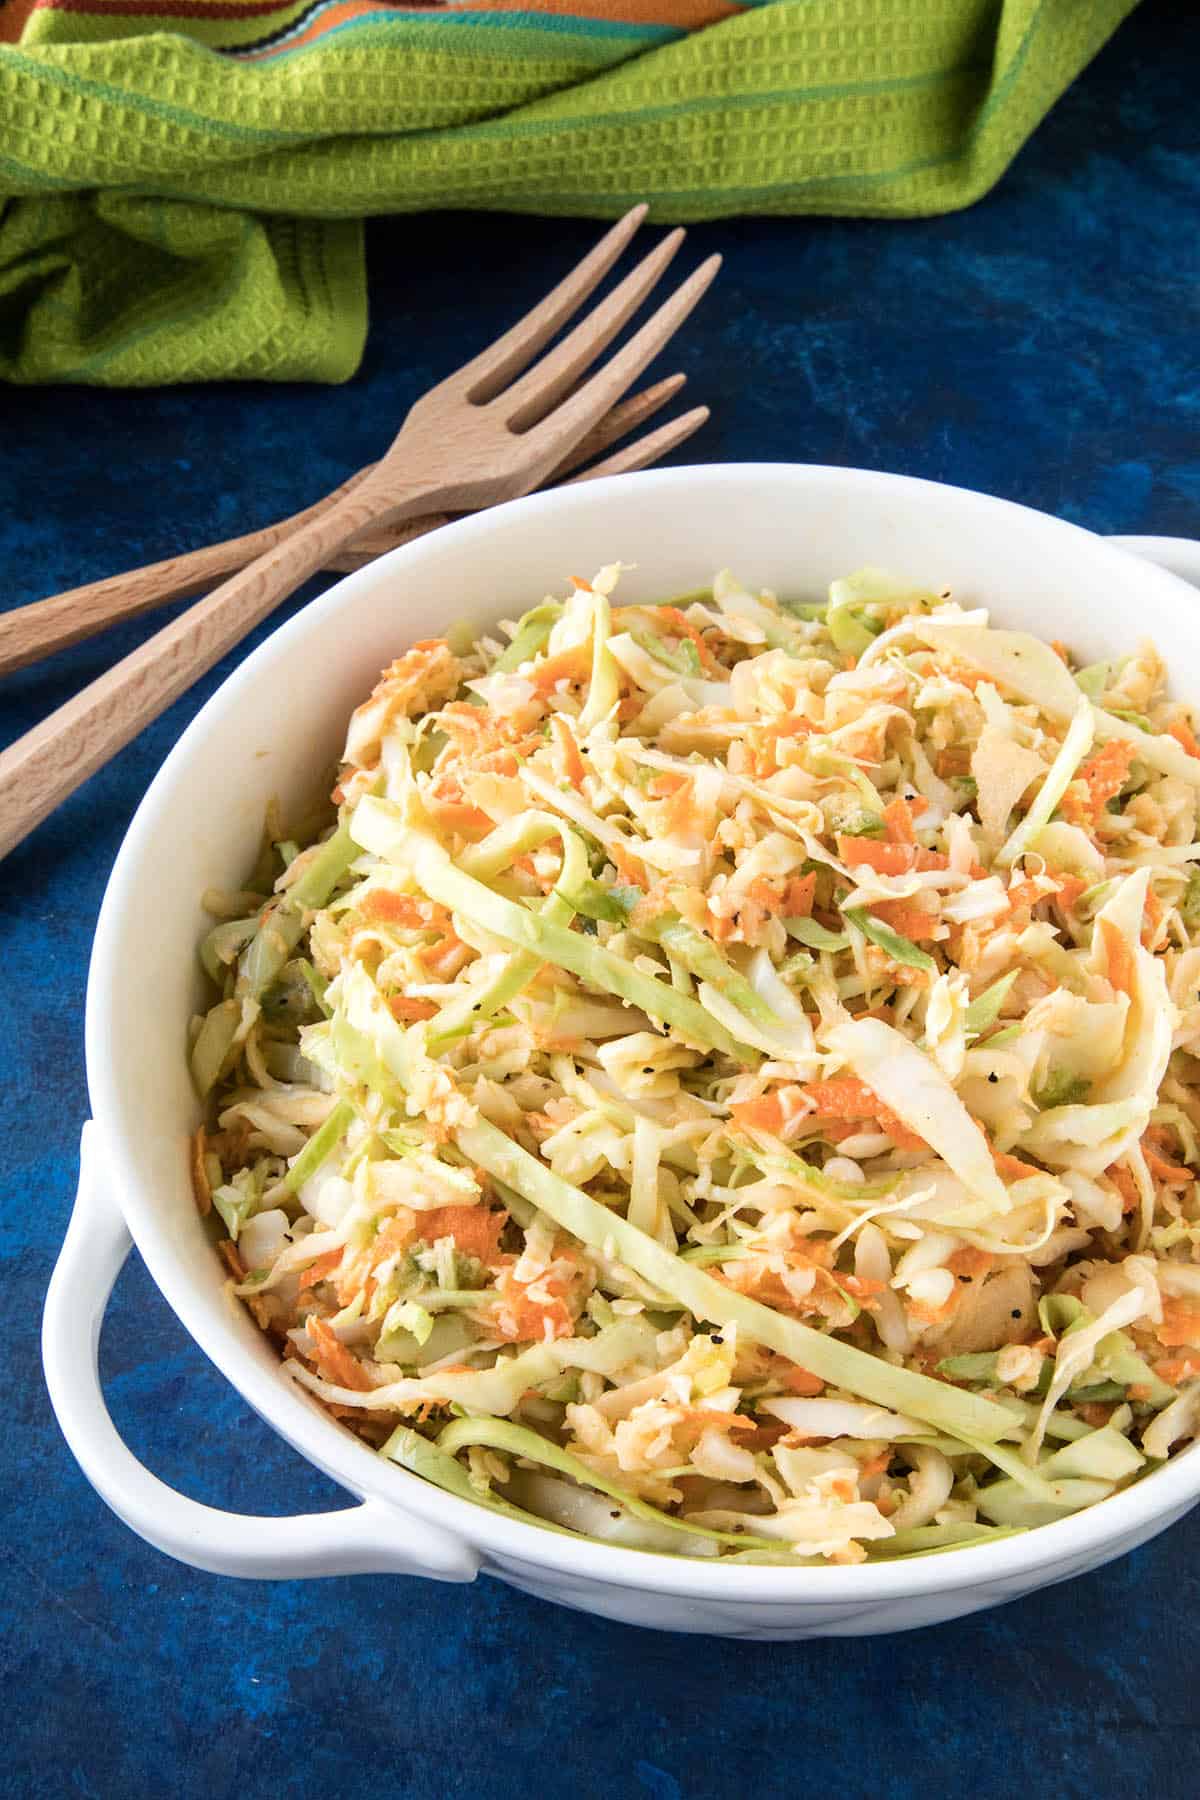 This Spicy Creamy Coleslaw is made with shredded cabbage, carrots, onion and jalapeno, then tossed with a creamy, spicy dressing